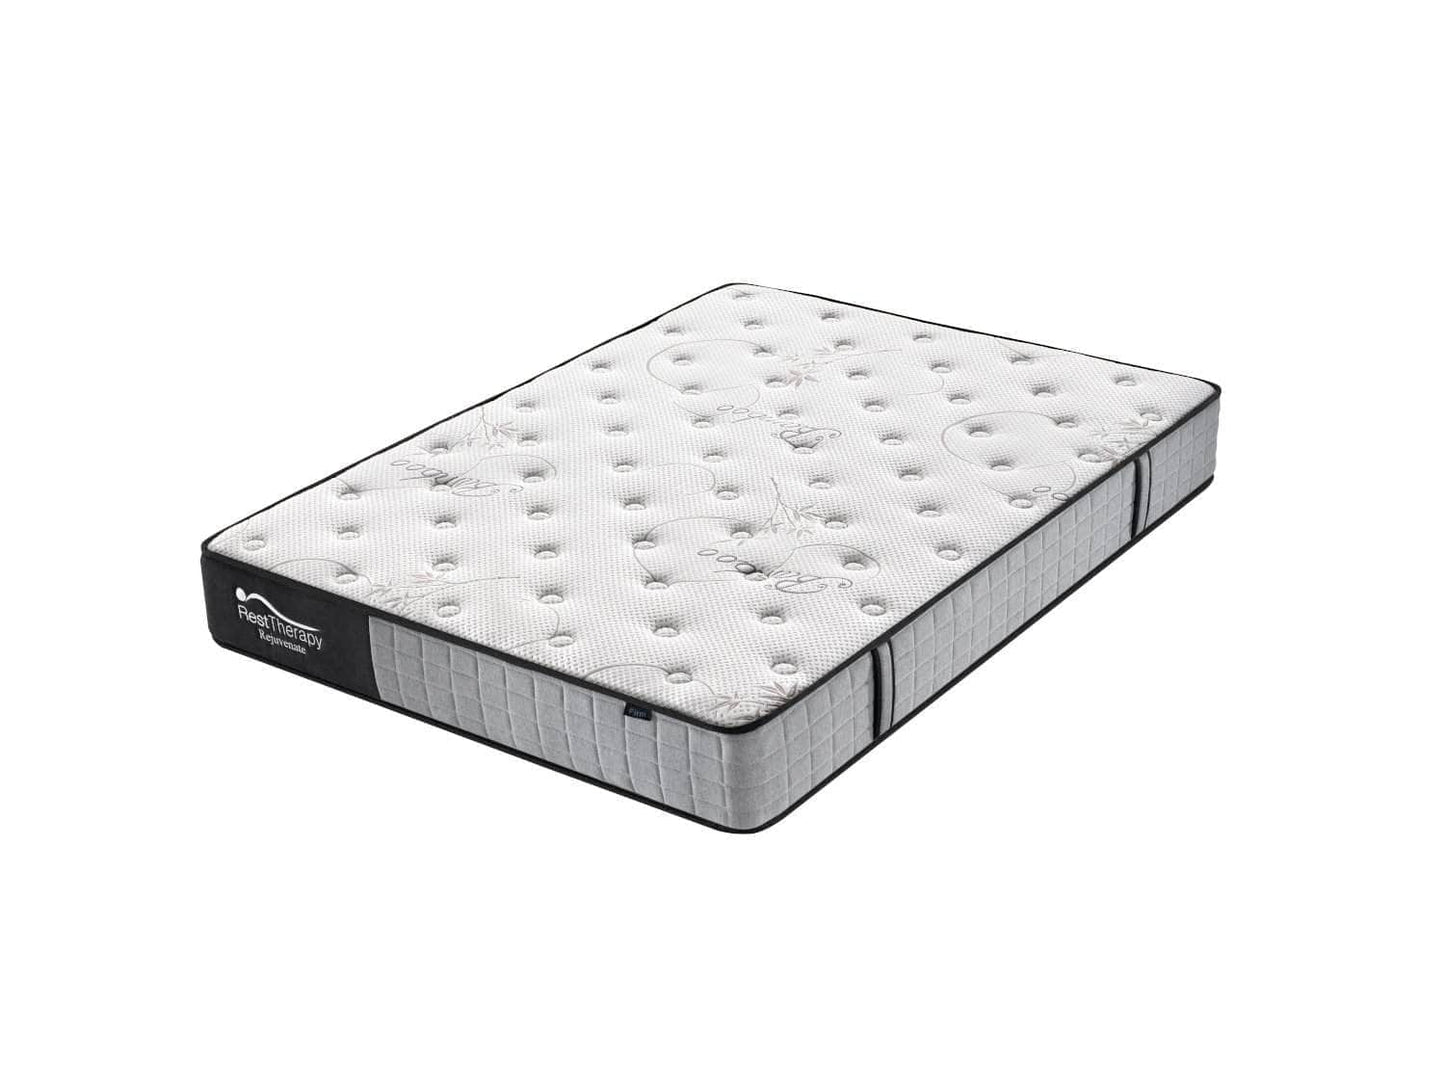 Rest Therapy Mattress Twin 10 Inch Rejuvenate Bamboo Pocket Coil Mattress - Available in 4 Sizes